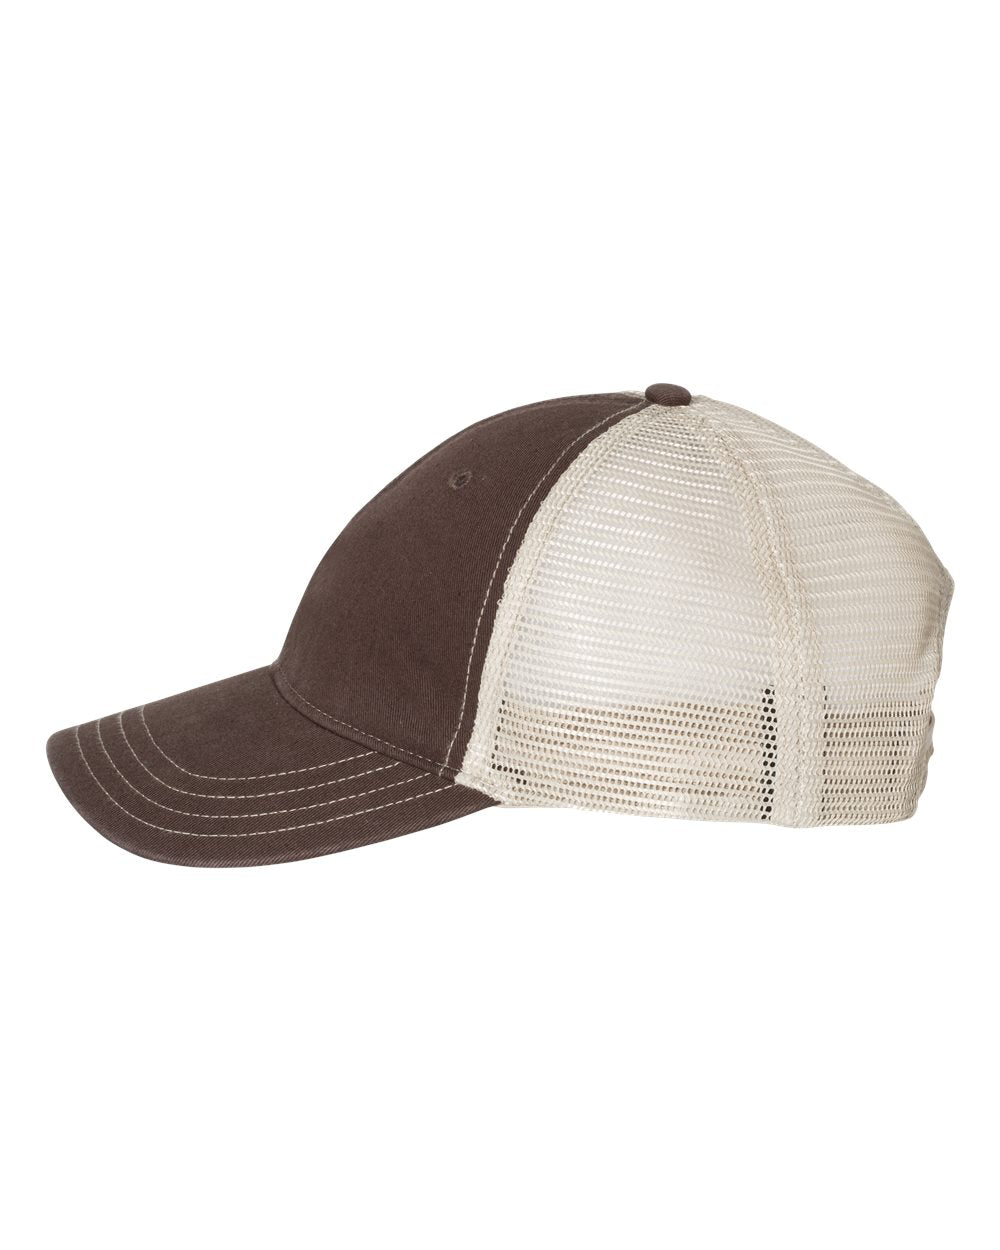 Image of the Kelly Hughes Band Signature Cap, featuring the band's embroidered logo on a classic cap, perfect for adding sophistication to any outfit.